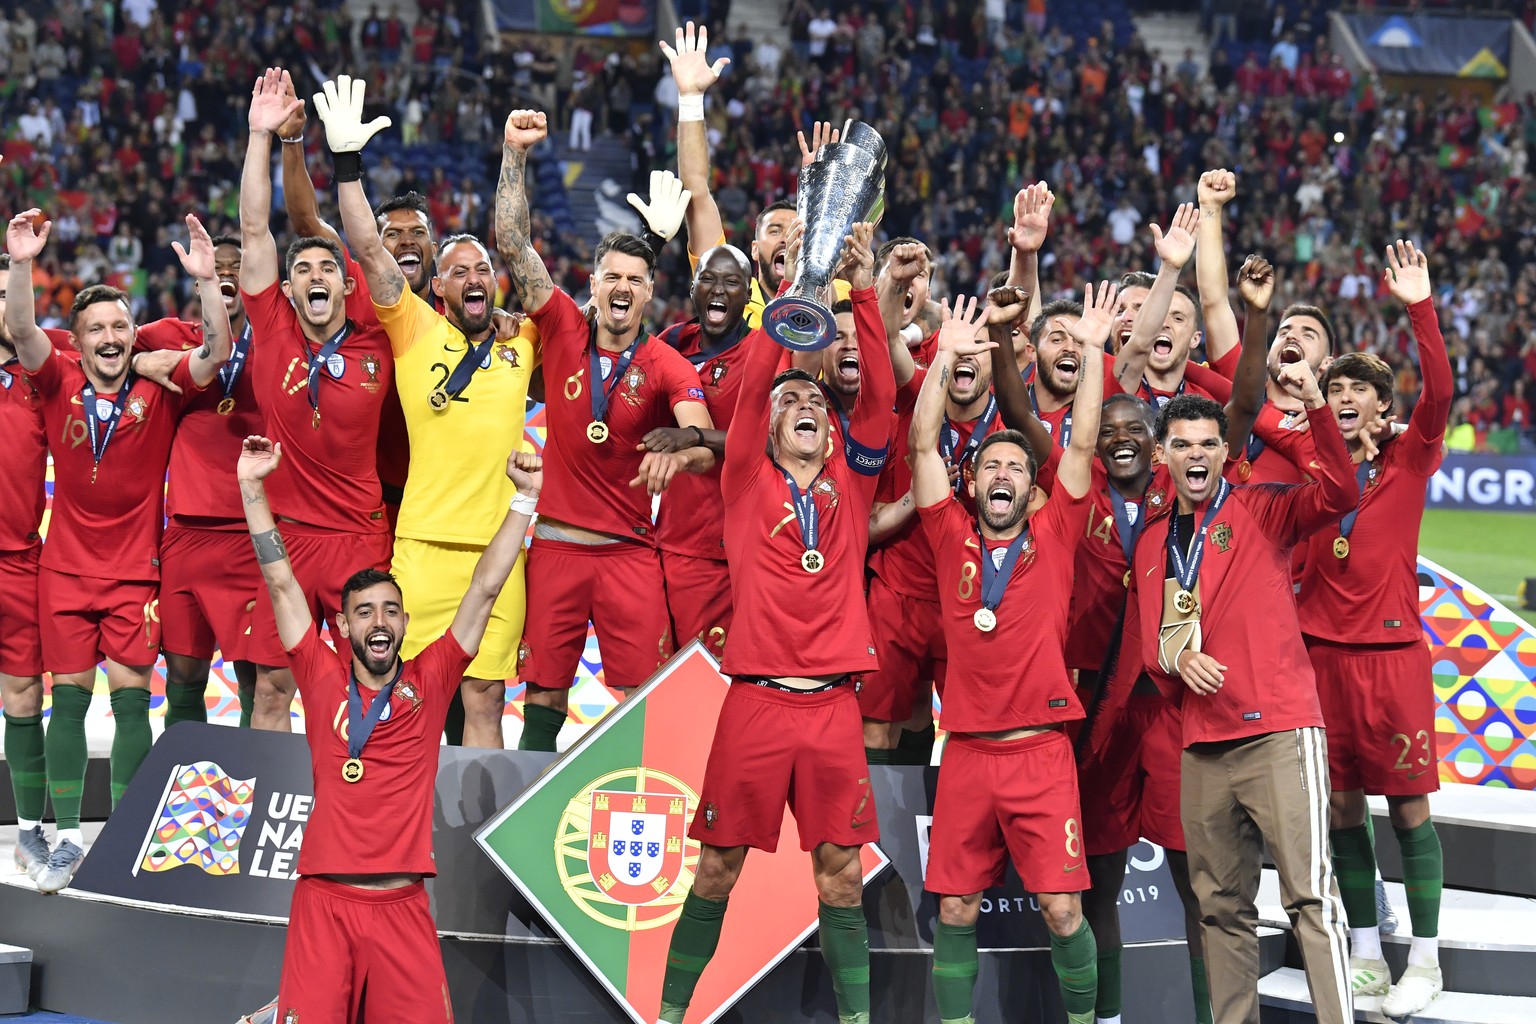 Portugal&#039;s Cristiano Ronaldo lifts up the trophy as he celebrates with players after winning the UEFA Nations League final soccer match between Portugal and Netherlands at the Dragao stadium in P ...